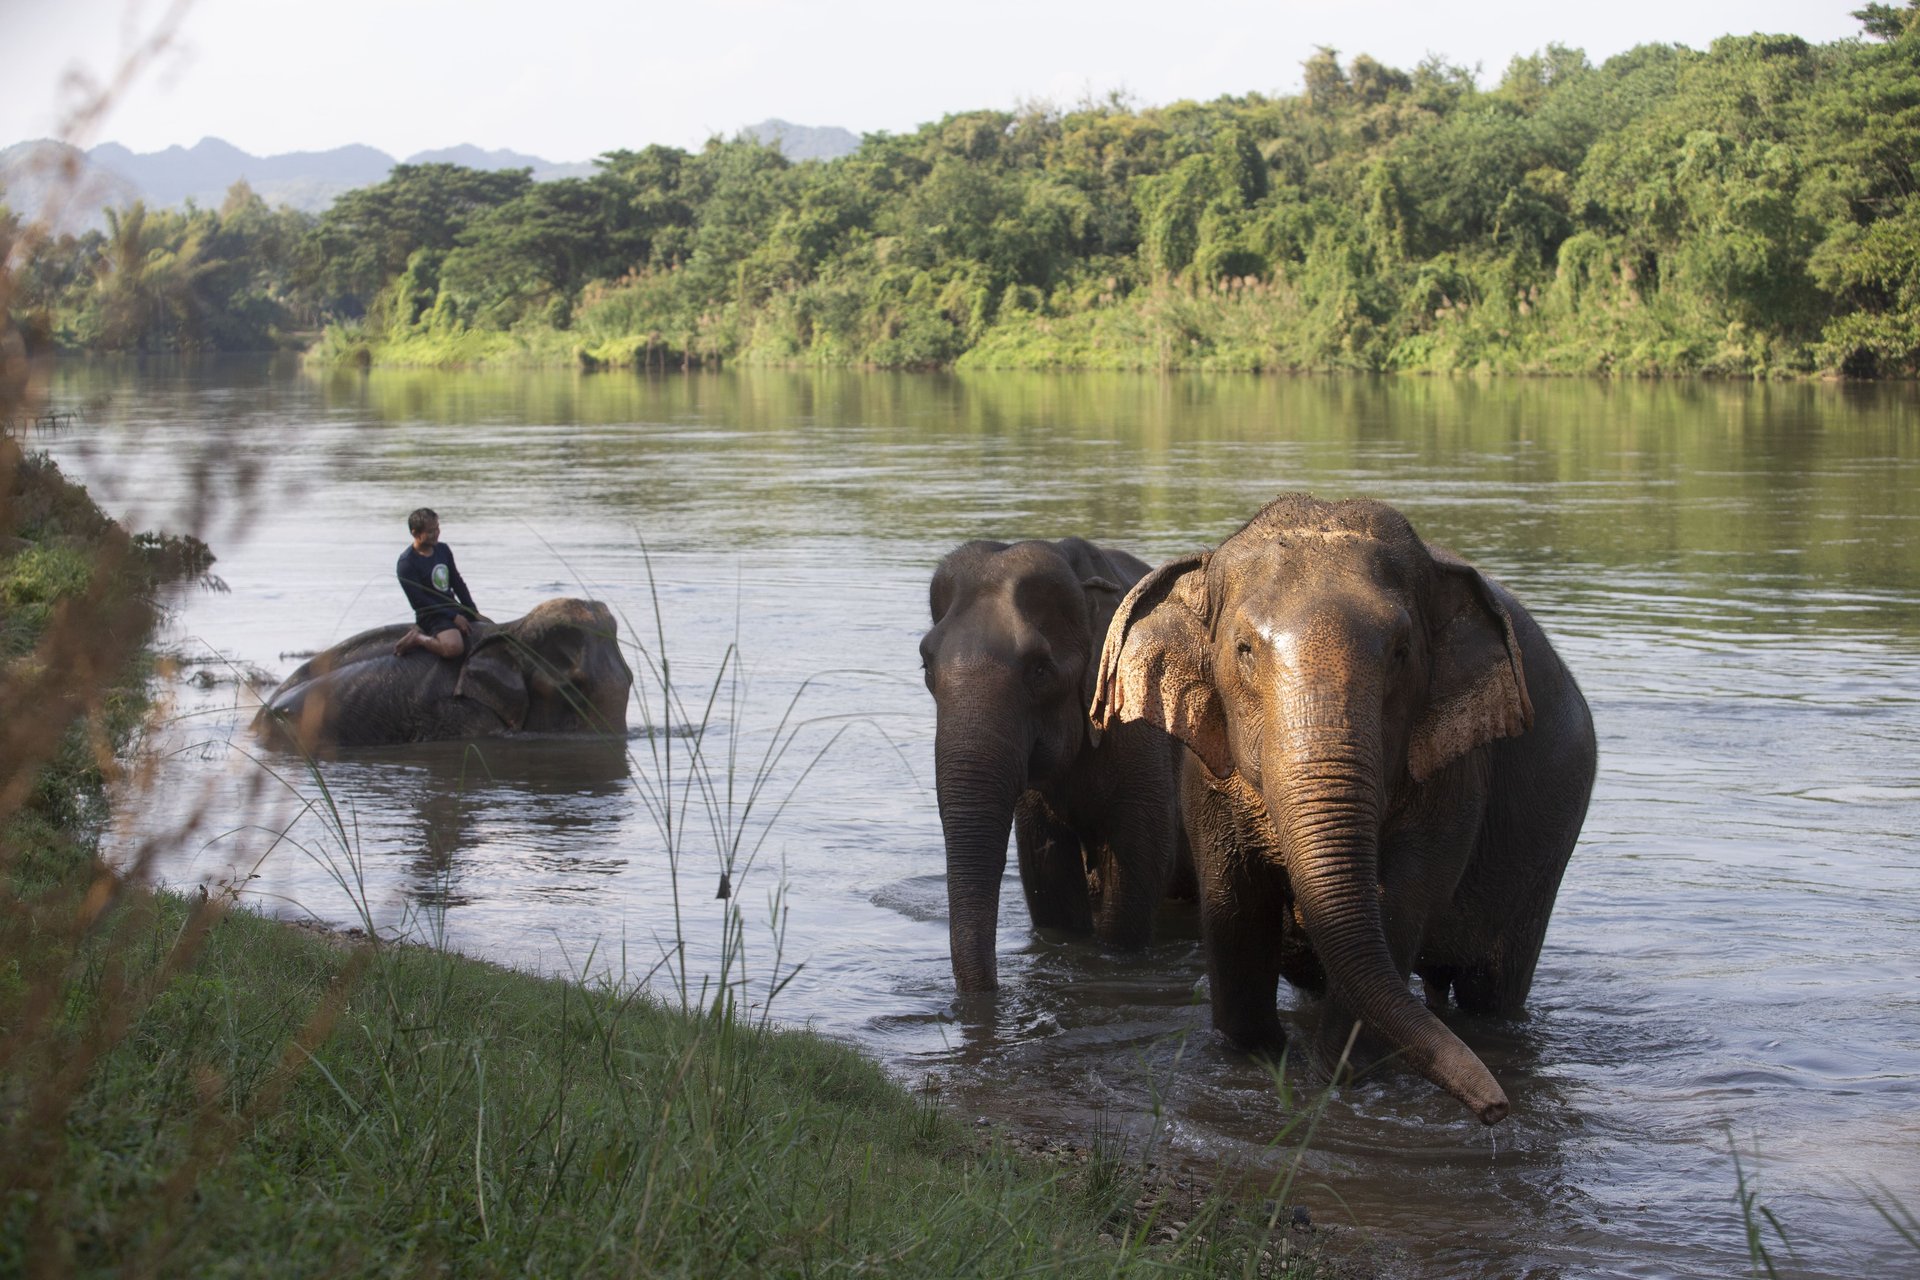 Three elephants bathing in the river. One of the elephants has a person on its back.